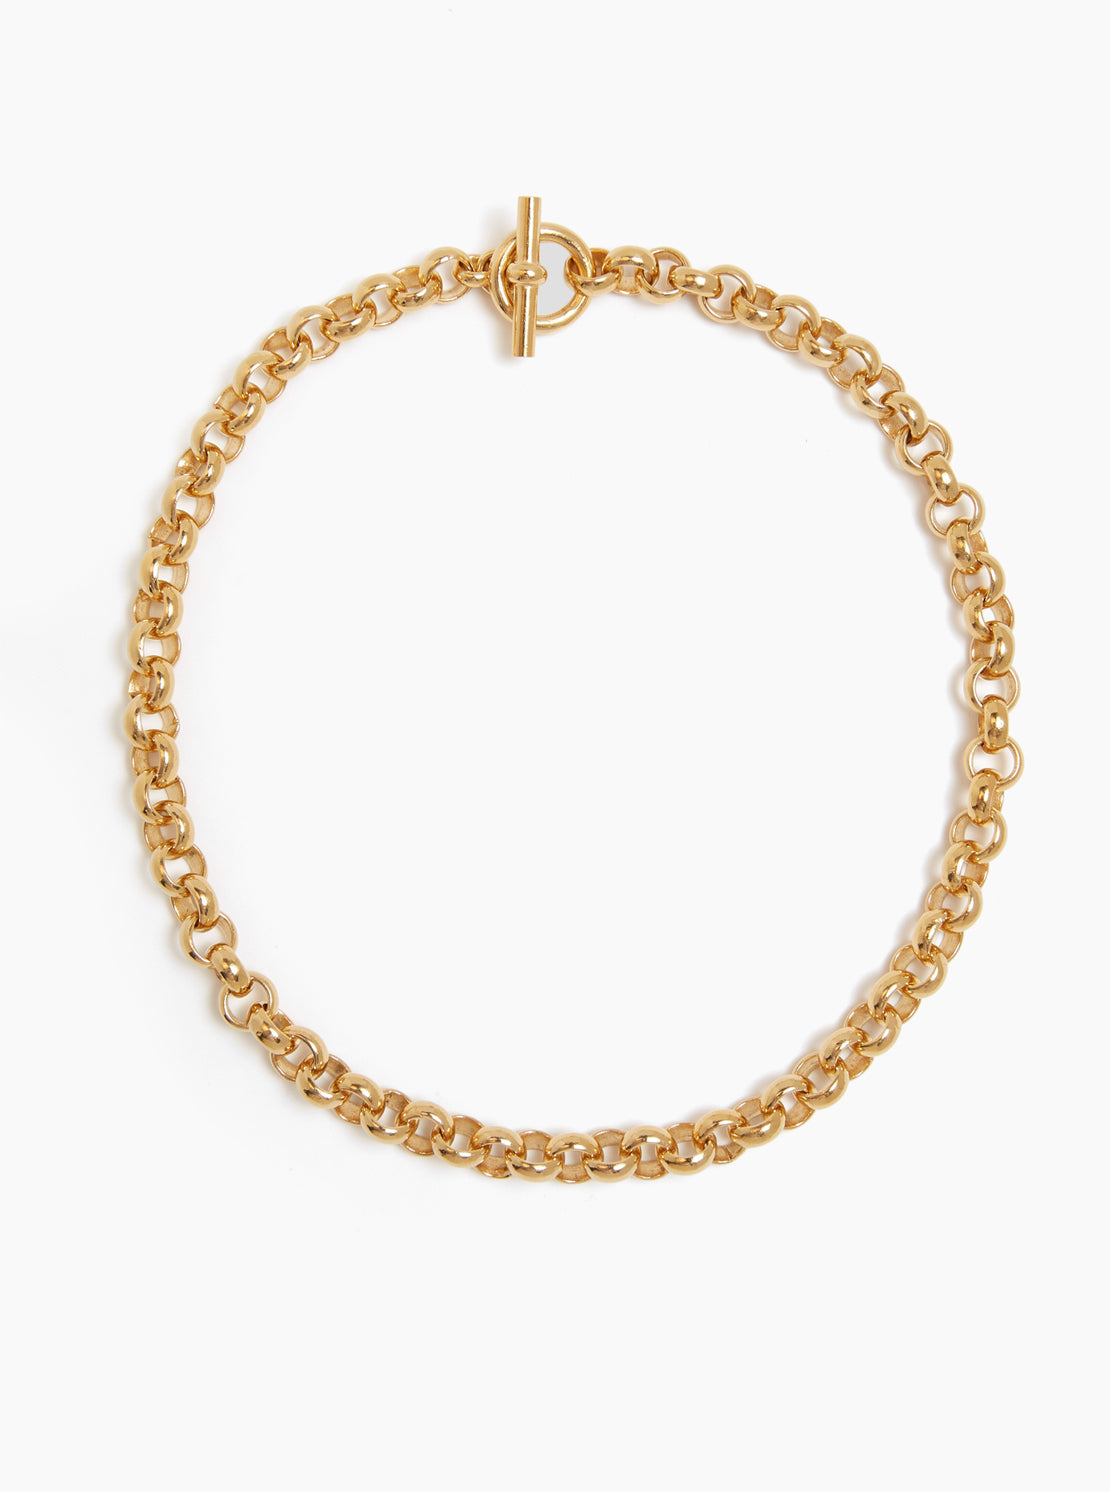 Small gold Rolo link necklace